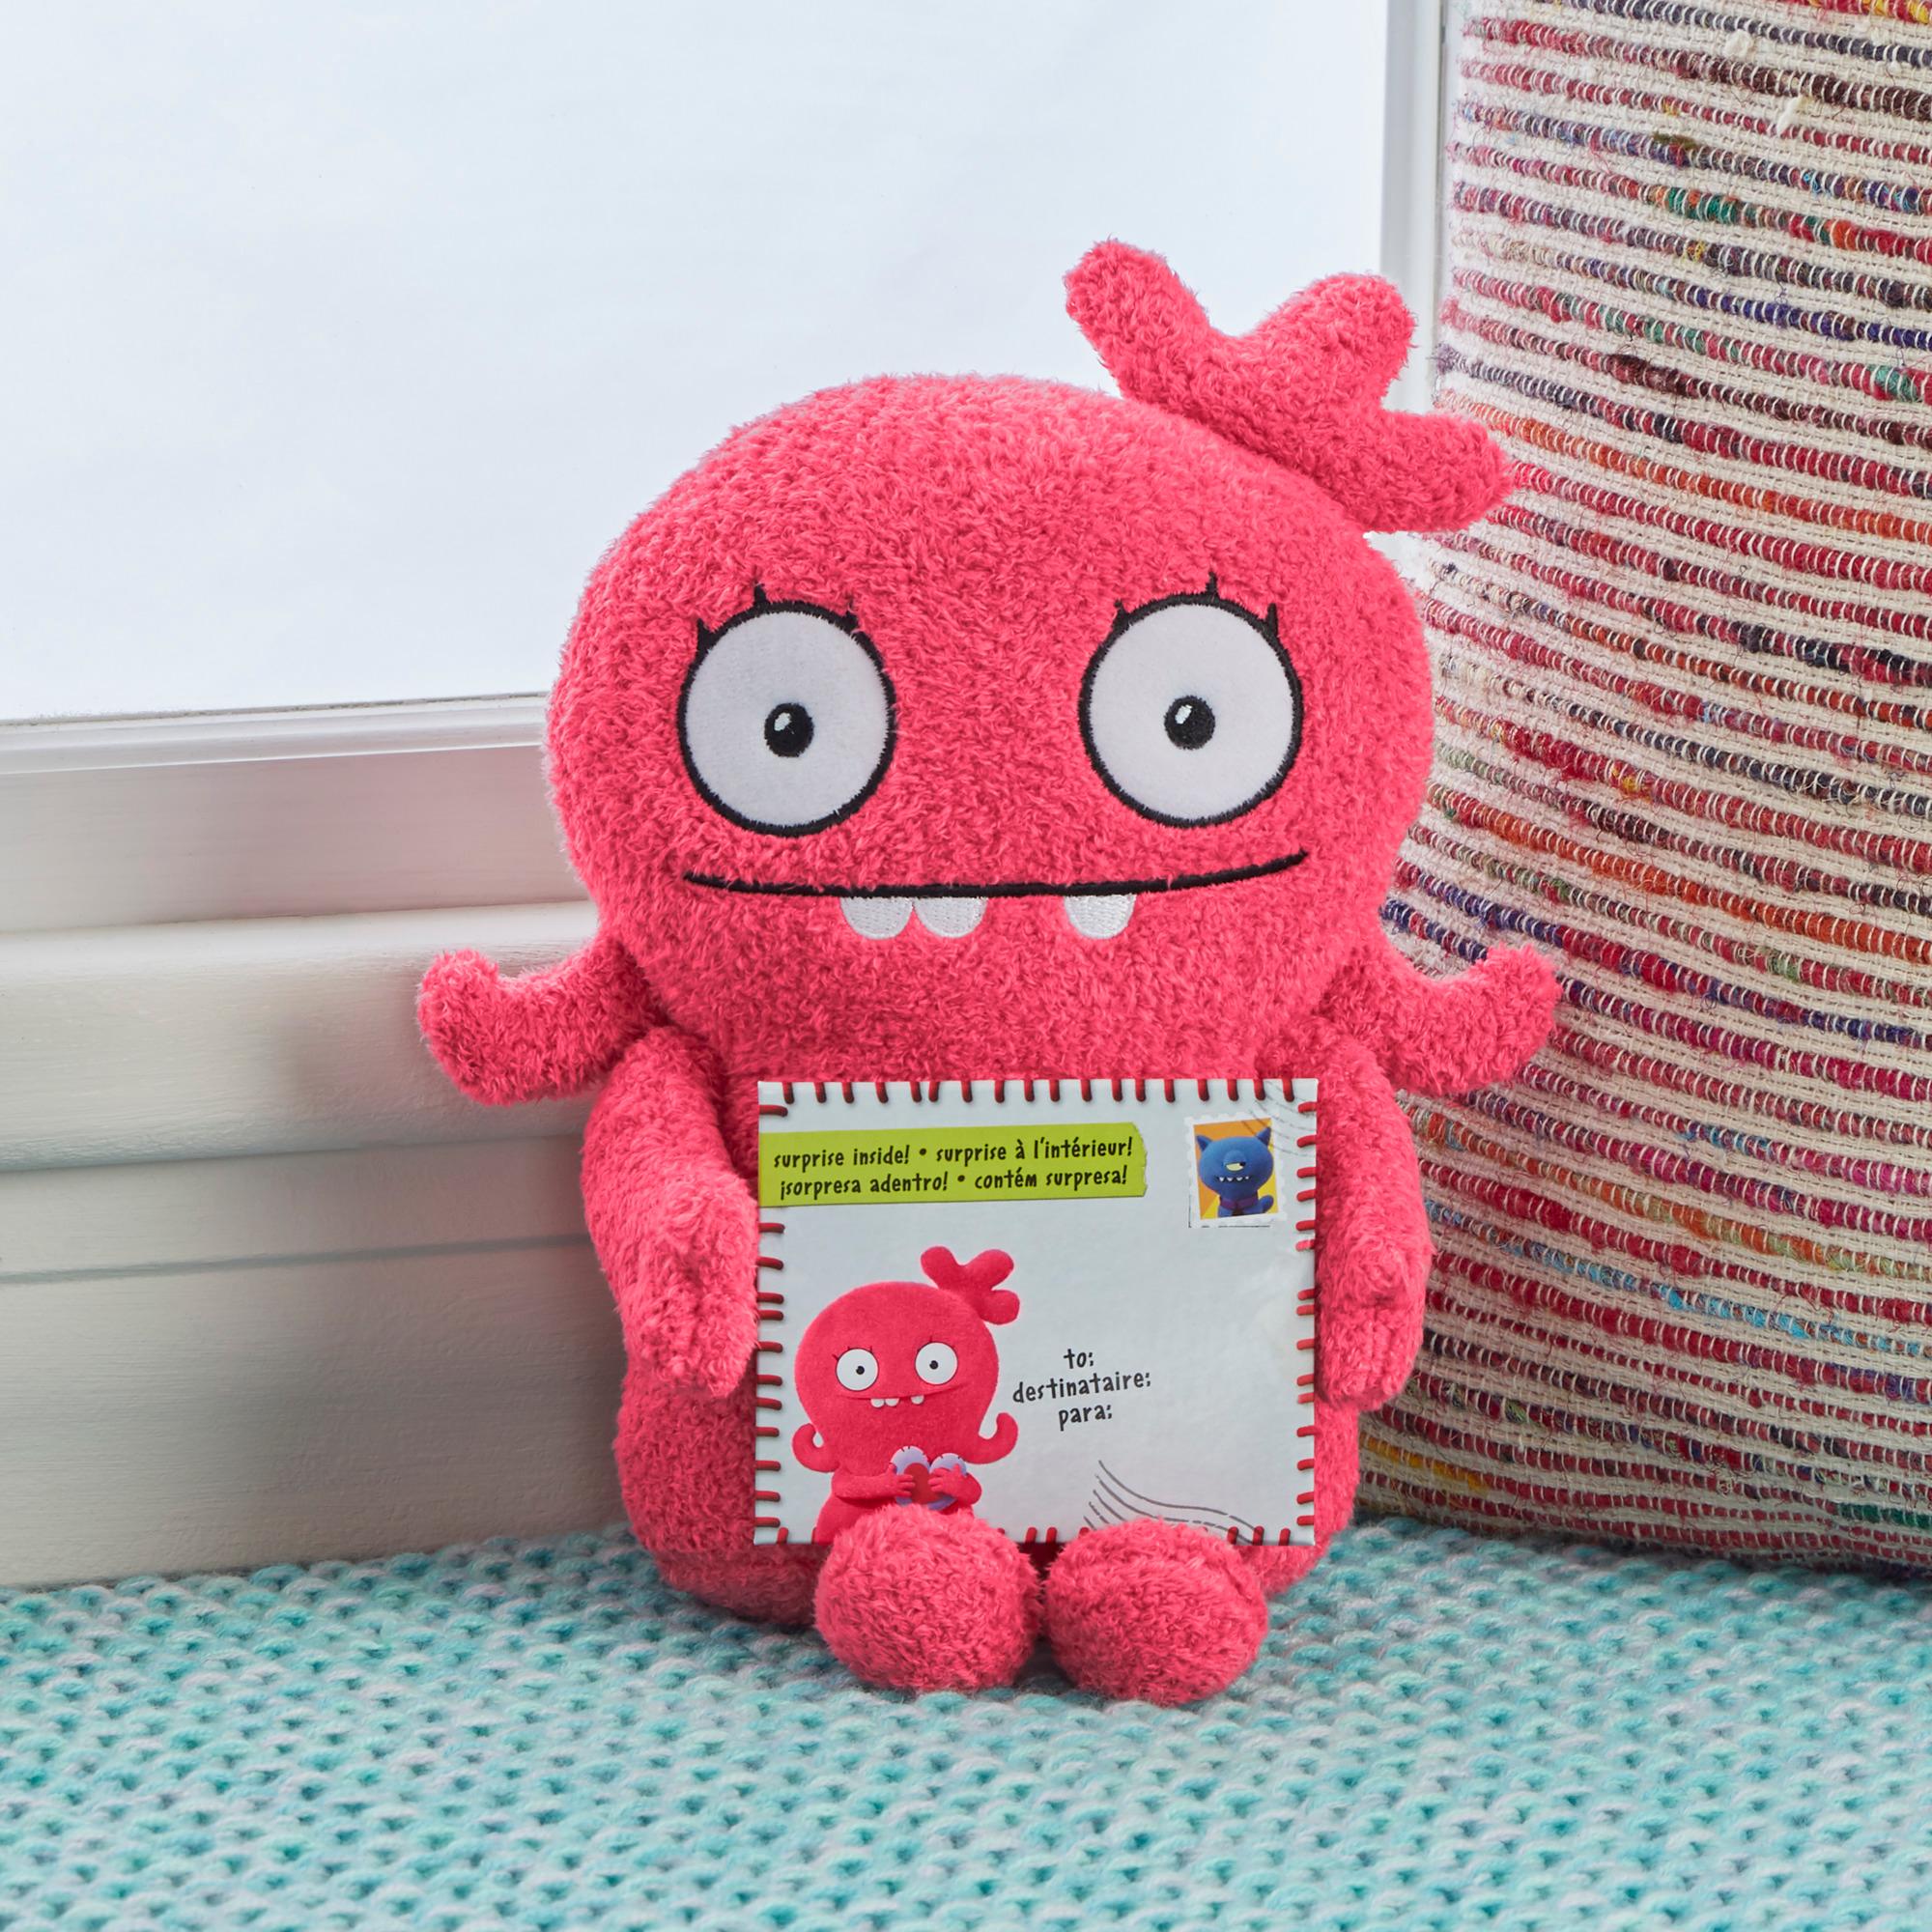 Uglydolls Yours Truly Moxy Stuffed Plush Toy 10 Inches Tall 2019 for sale online